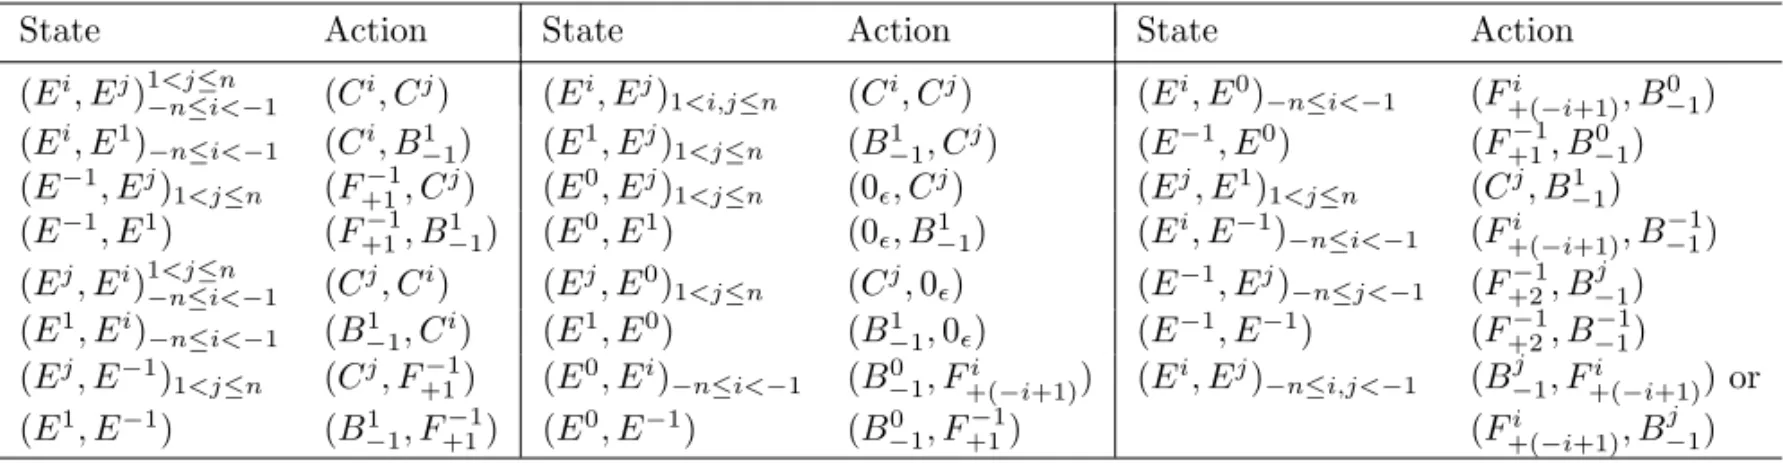 Table 4: Partial schema of the optimal policy π ∗ for the case of two interacting agents